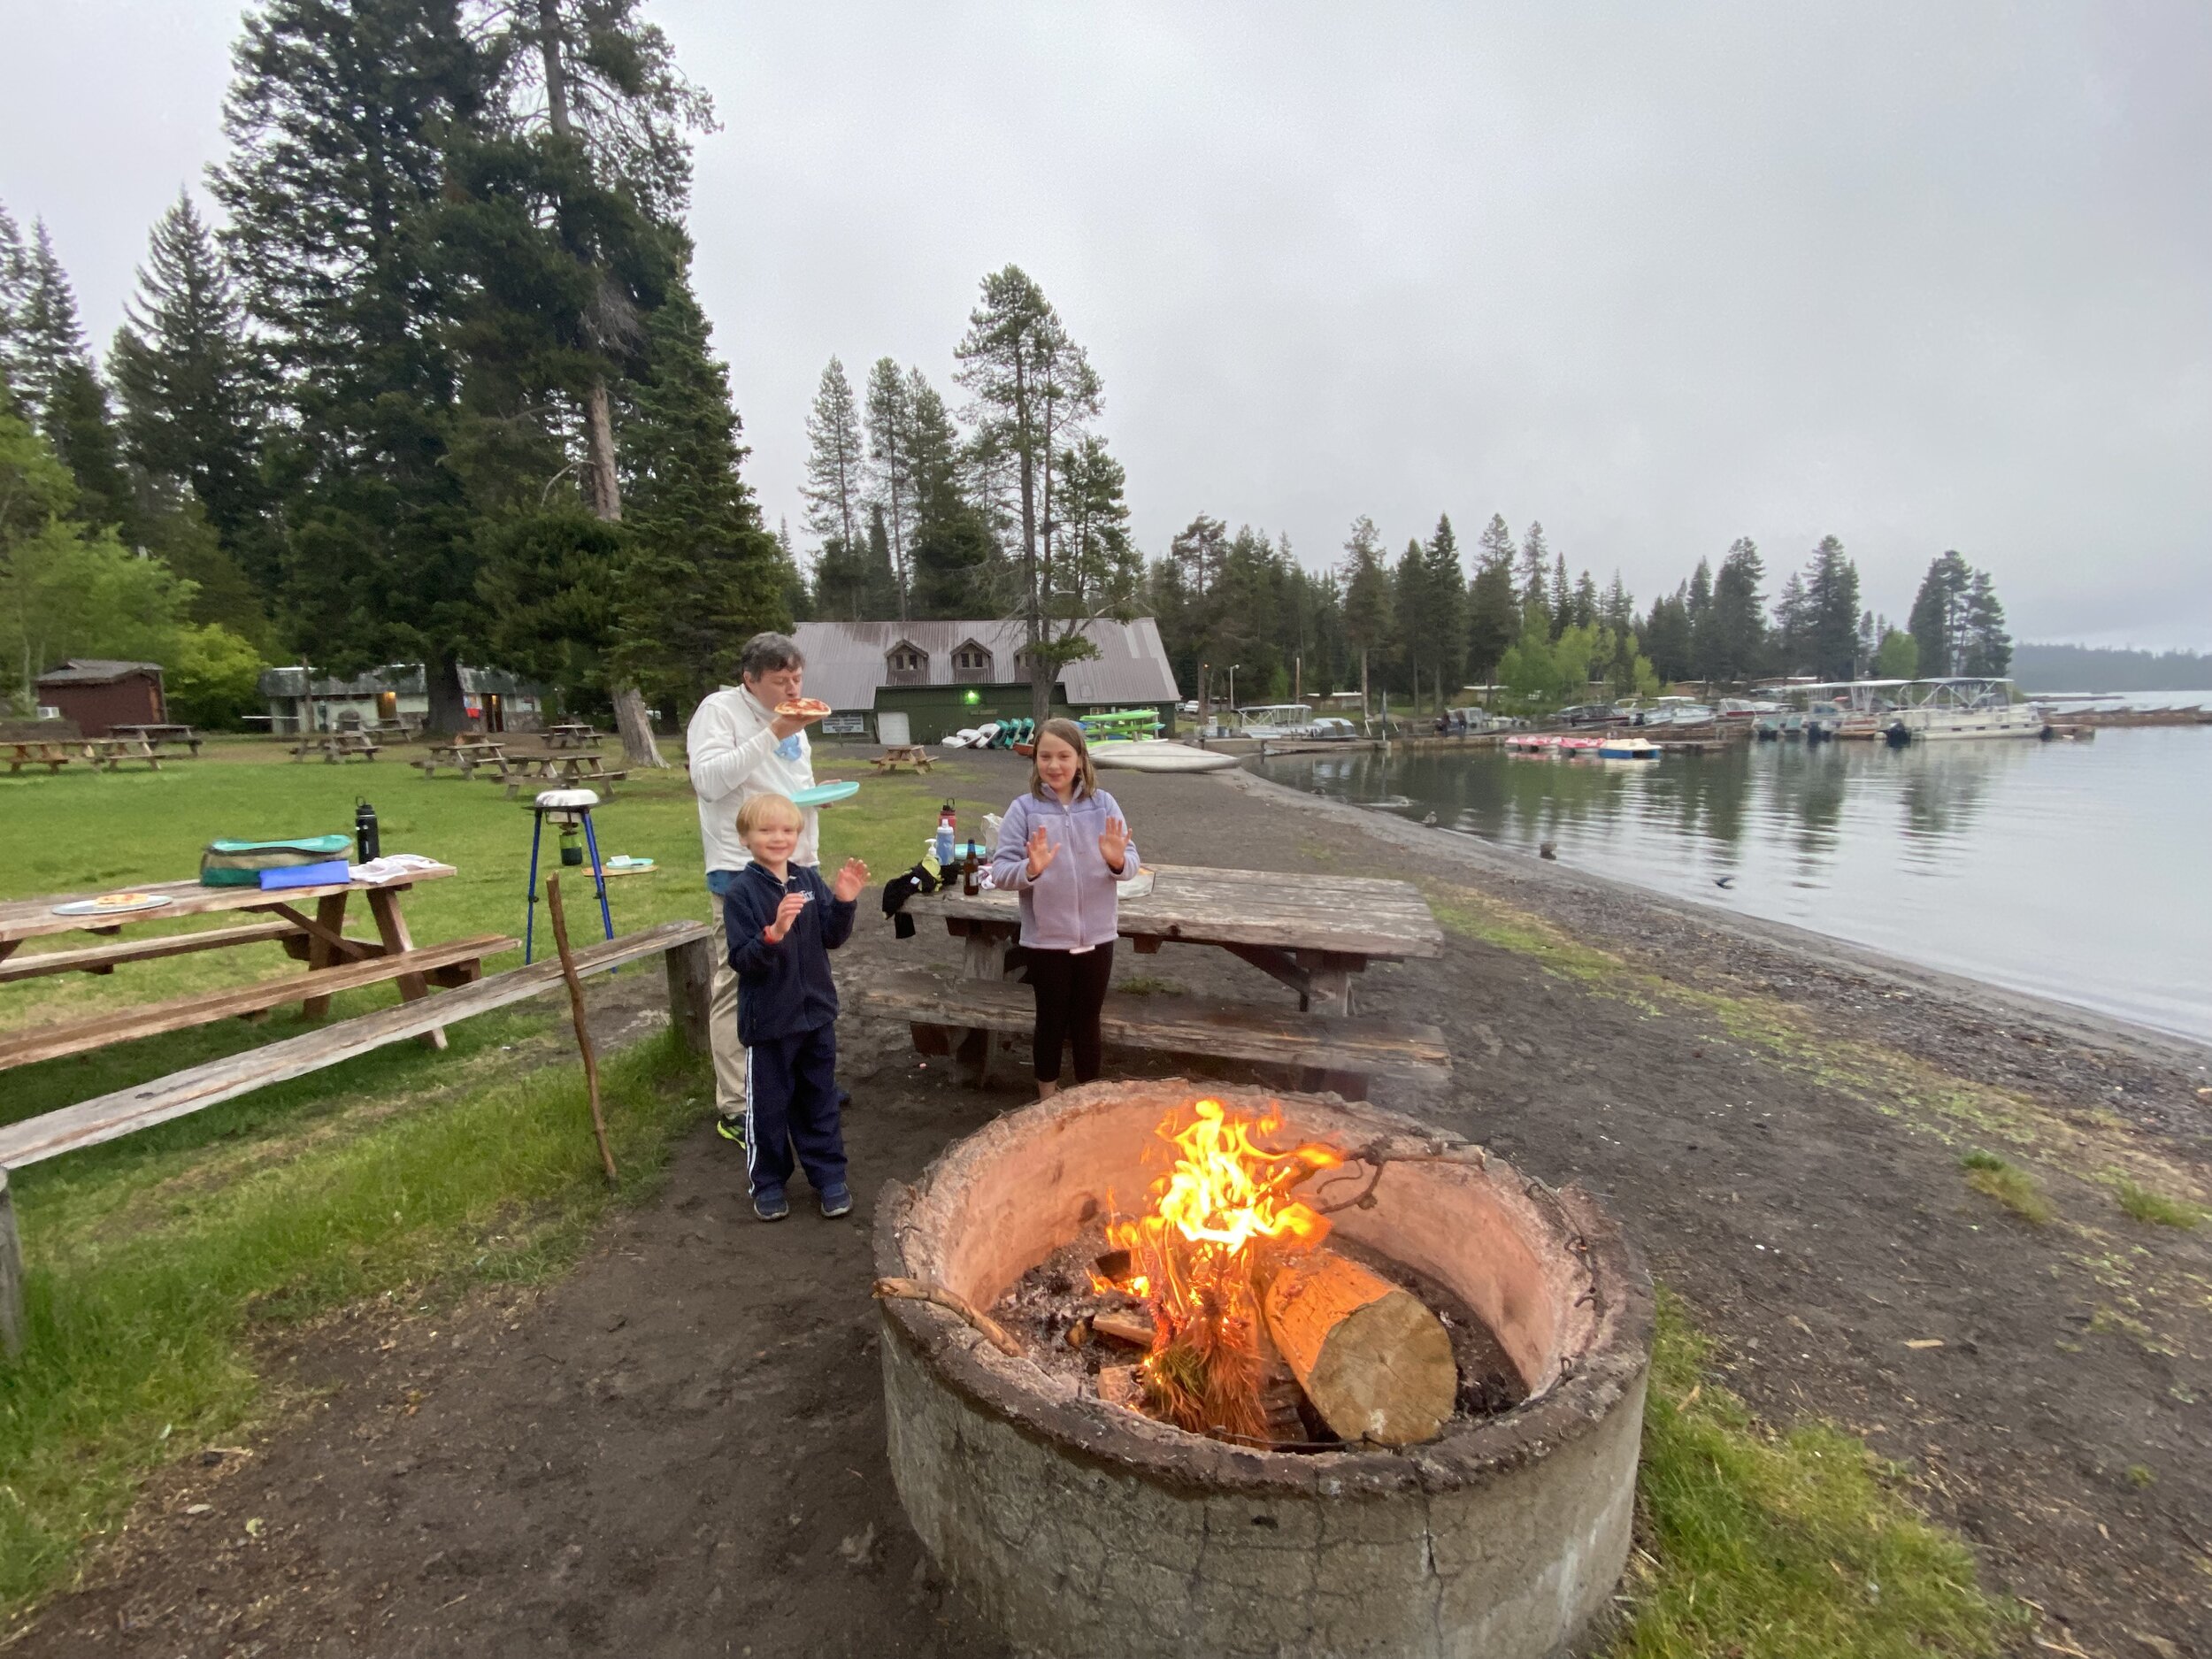 Picnicking, warming up, and drying off from the drizzle at our dinner campfire on the shore of Diamond Lake.  Photo by Karen Boudreaux, June 13, 2021